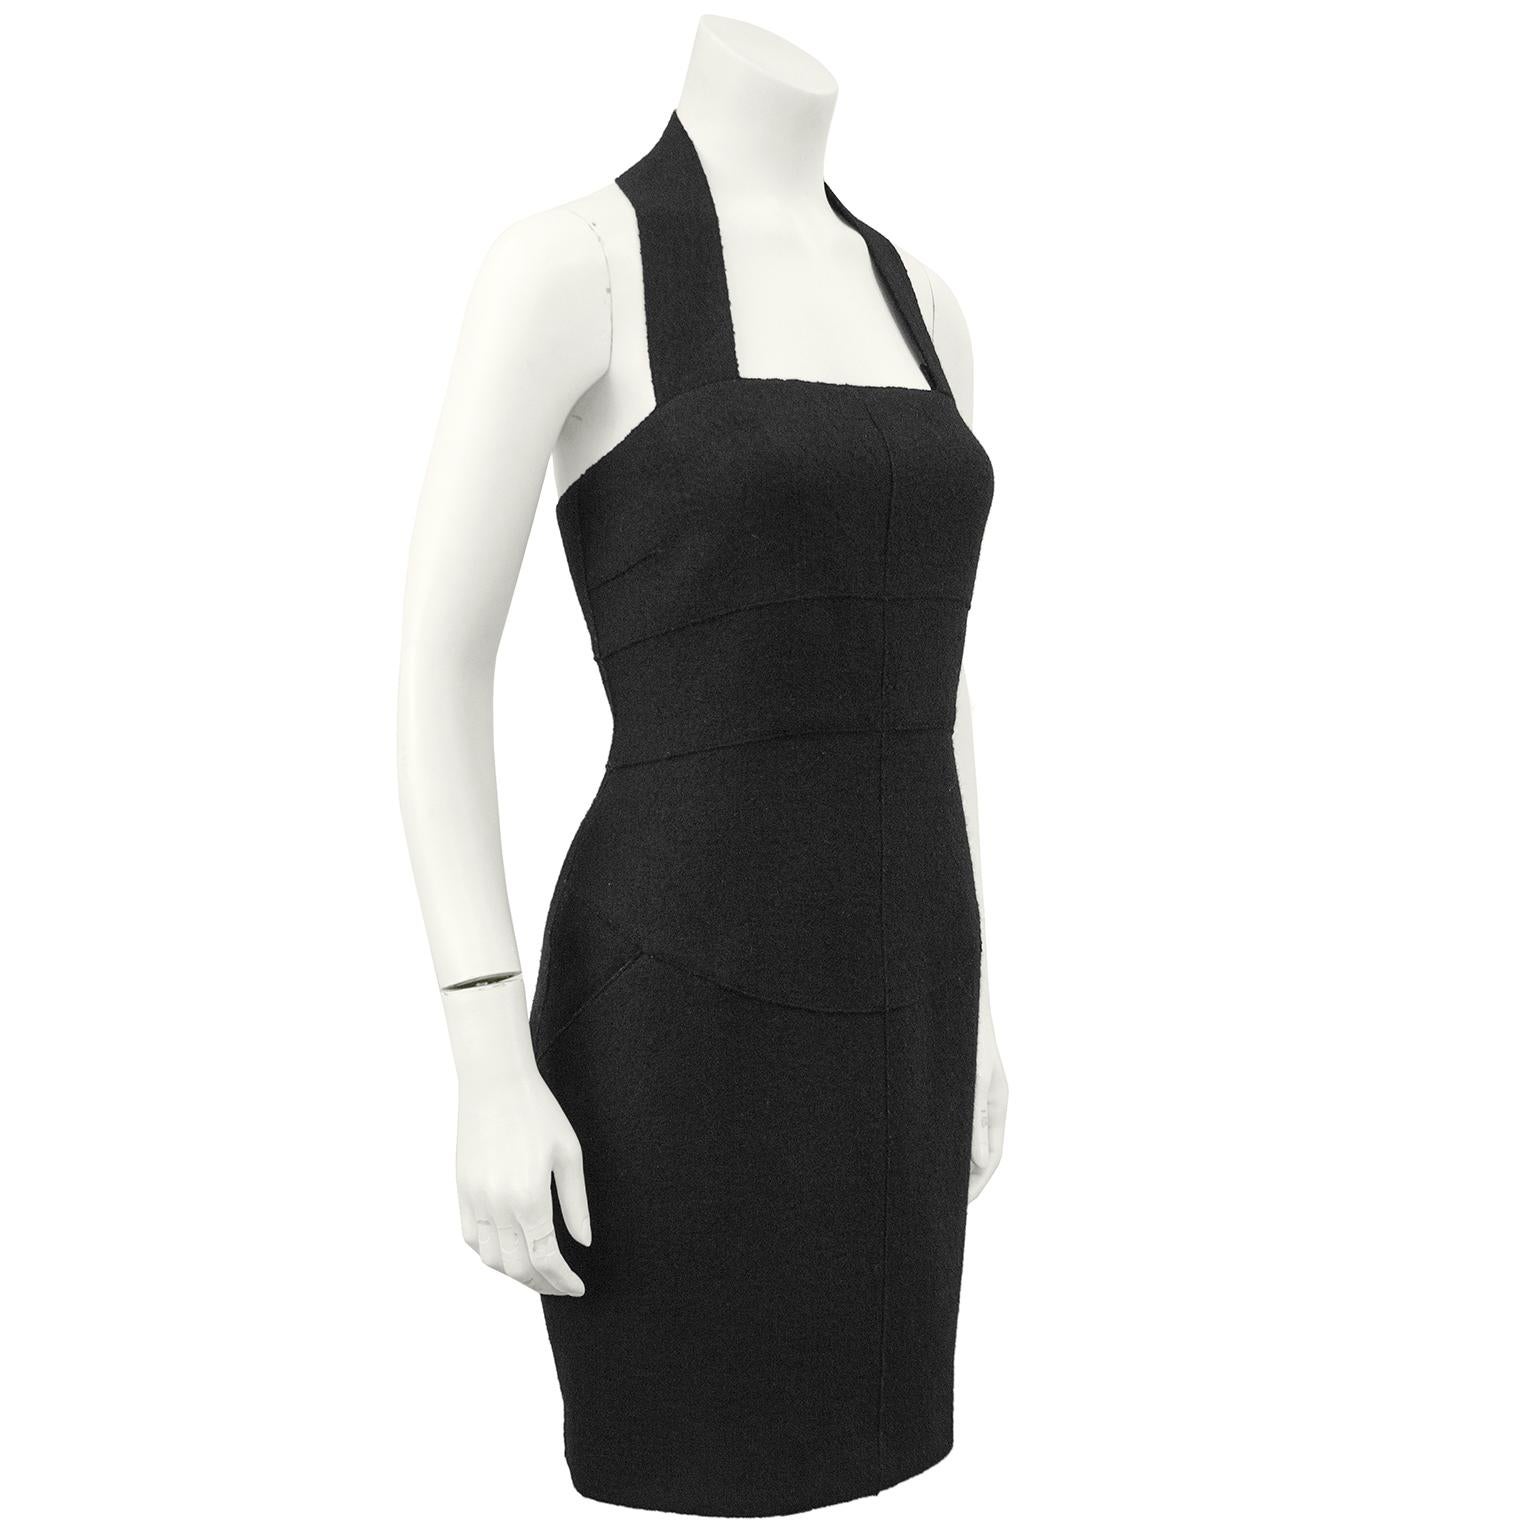 1999 Fall Chanel black wool halter dress with two hip front pockets and seaming down the front. The dress zips up the back and the thick halter strap fastens at the nape of the neck with a black CHANEL button. In excellent condition, fully lined in